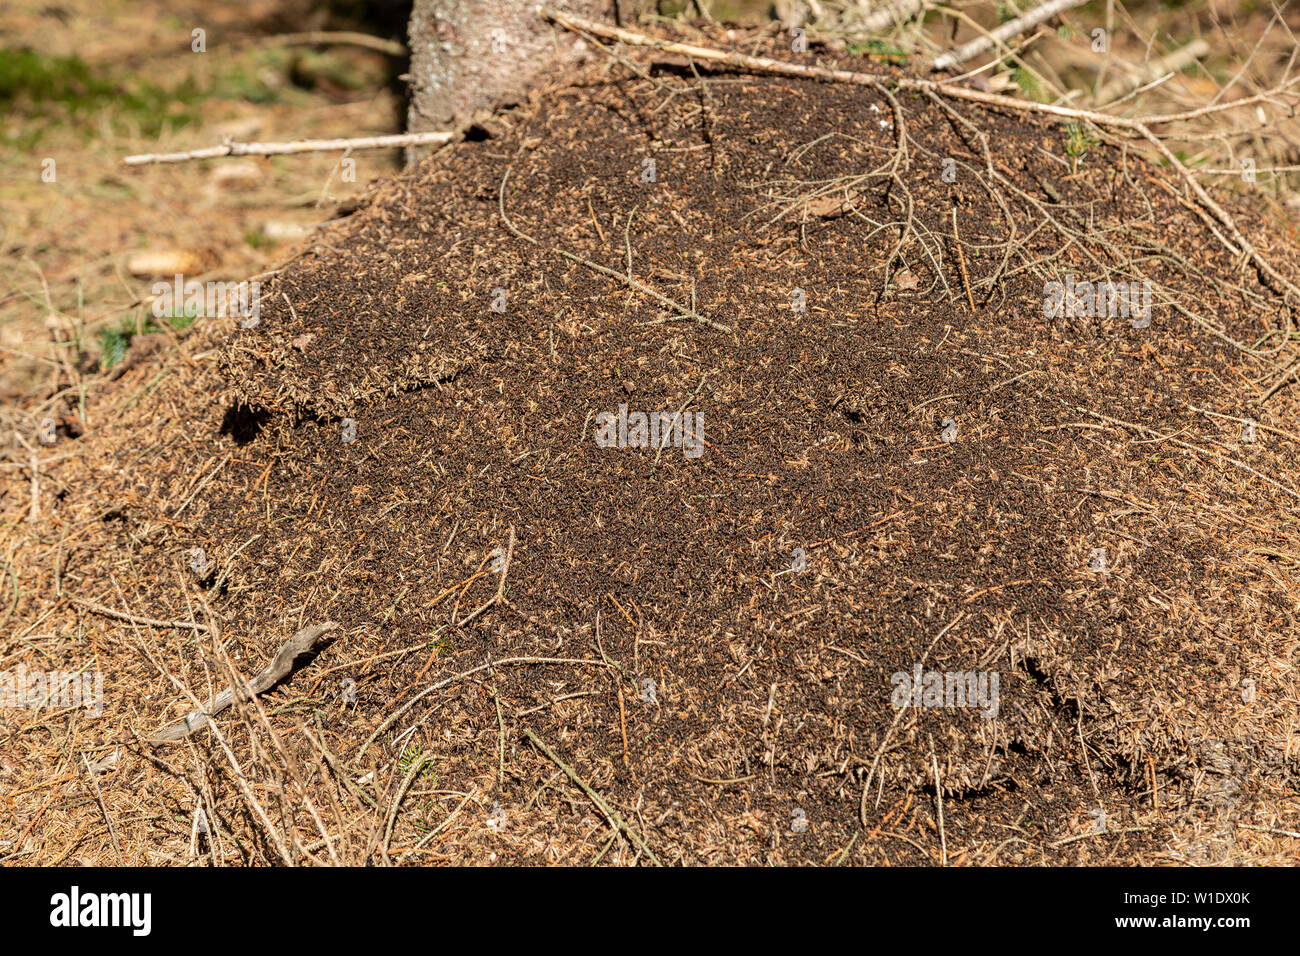 Formica polyctena nest, sun-basking red wood ants in early spring Stock Photo